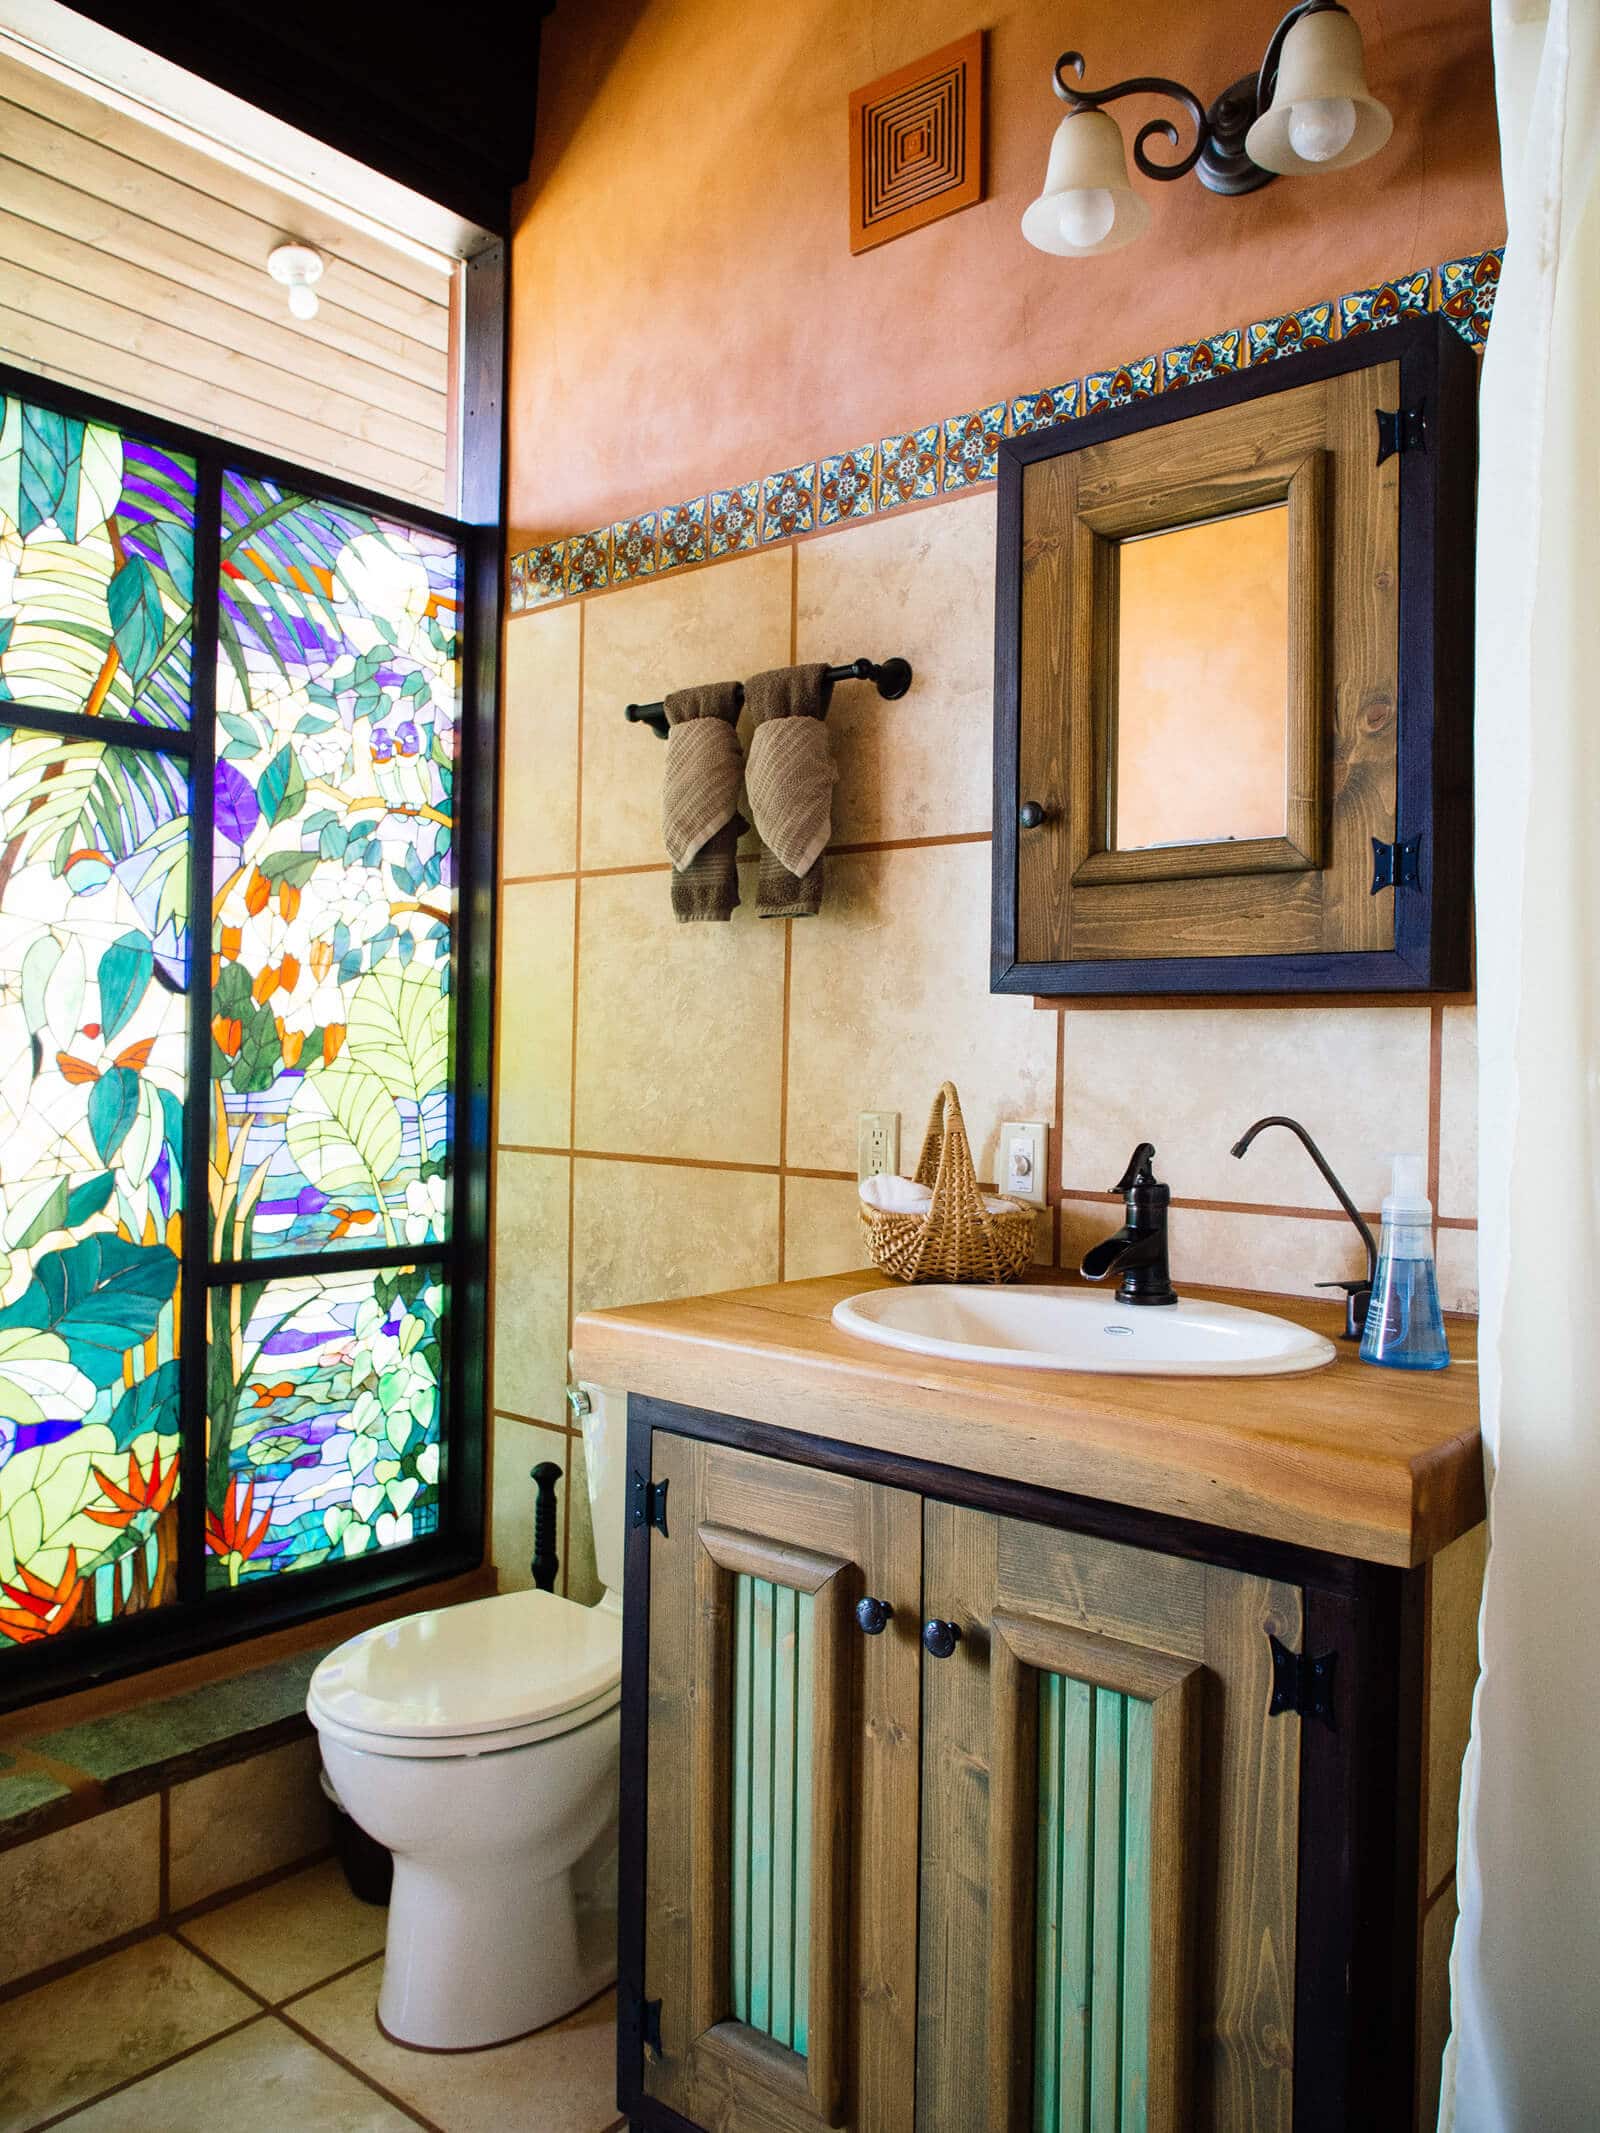 Stained glass windows in an Earthship